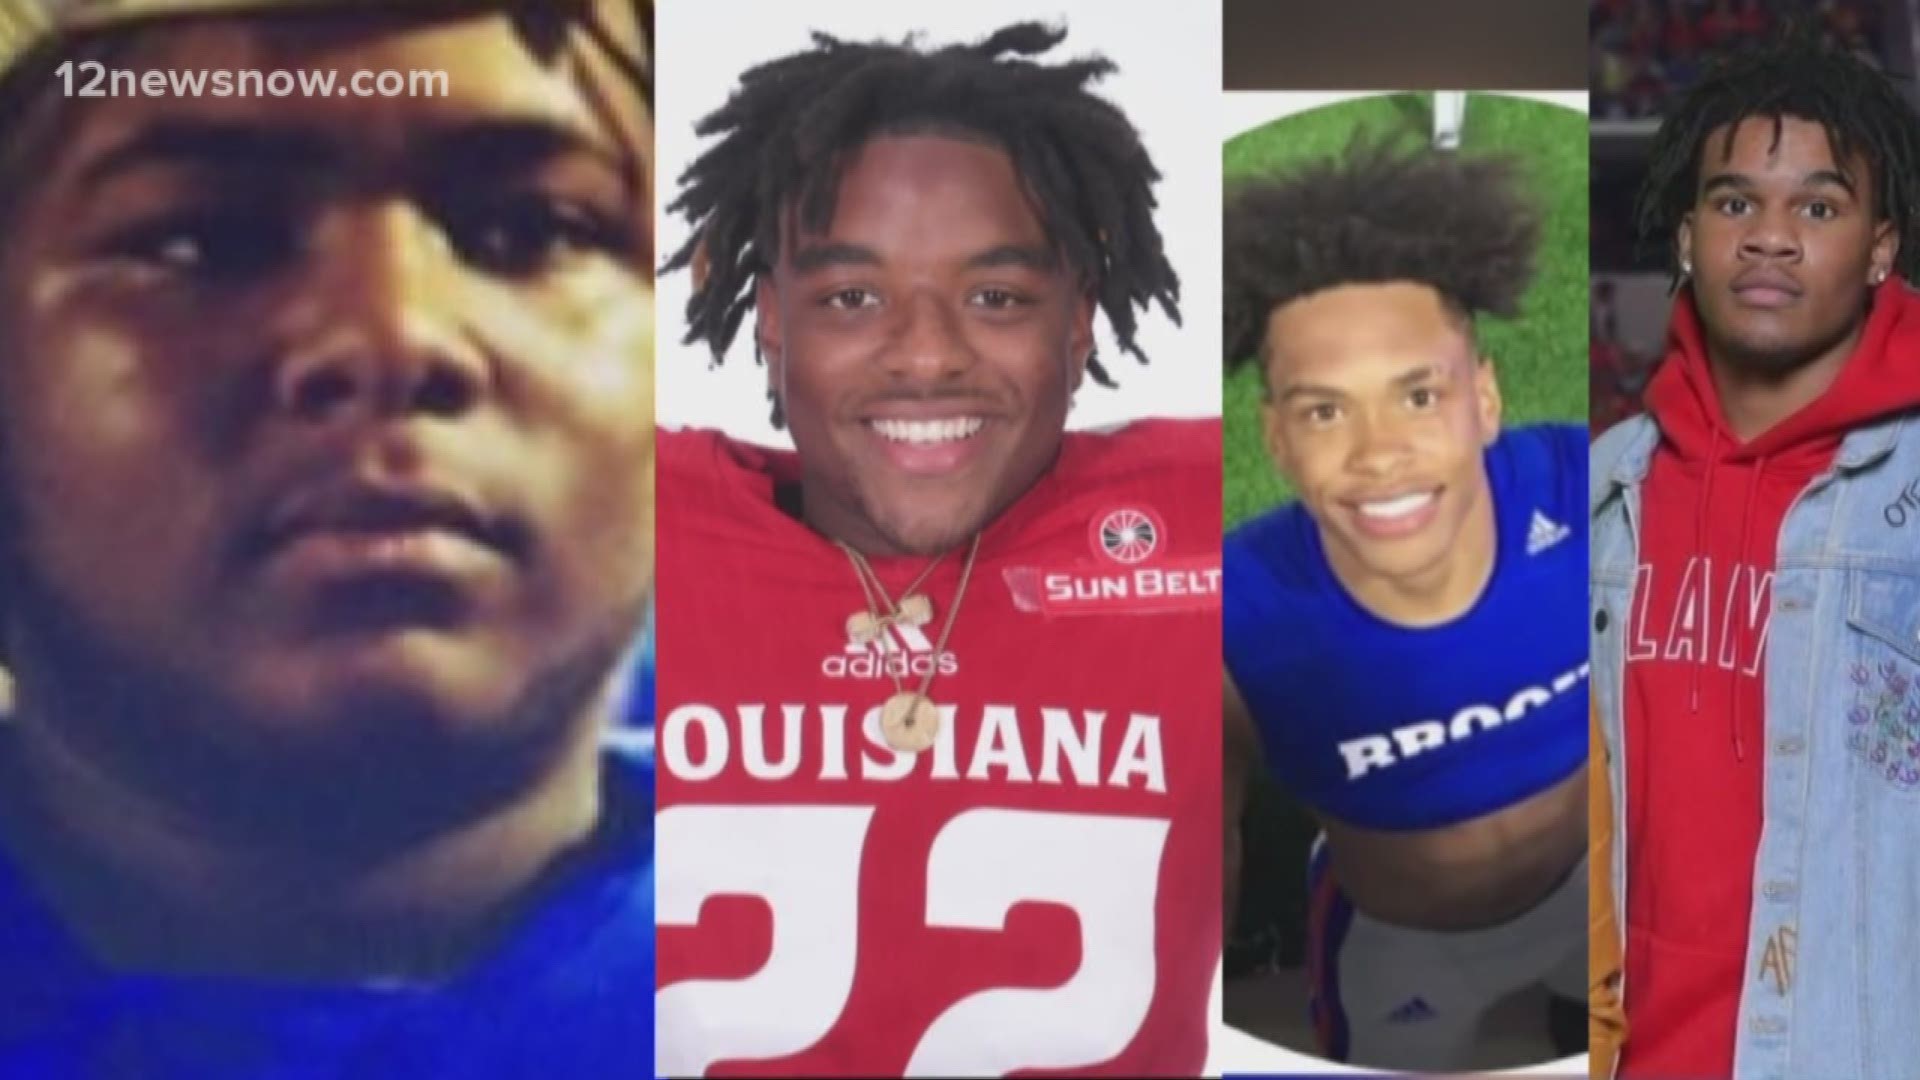 Four of them were in an accident off of Brooks Road in Beaumont back in July. Raybren Morris, Ja'Kobi Holland, Thaddeus Johnson and Noah Washington were all hurt.